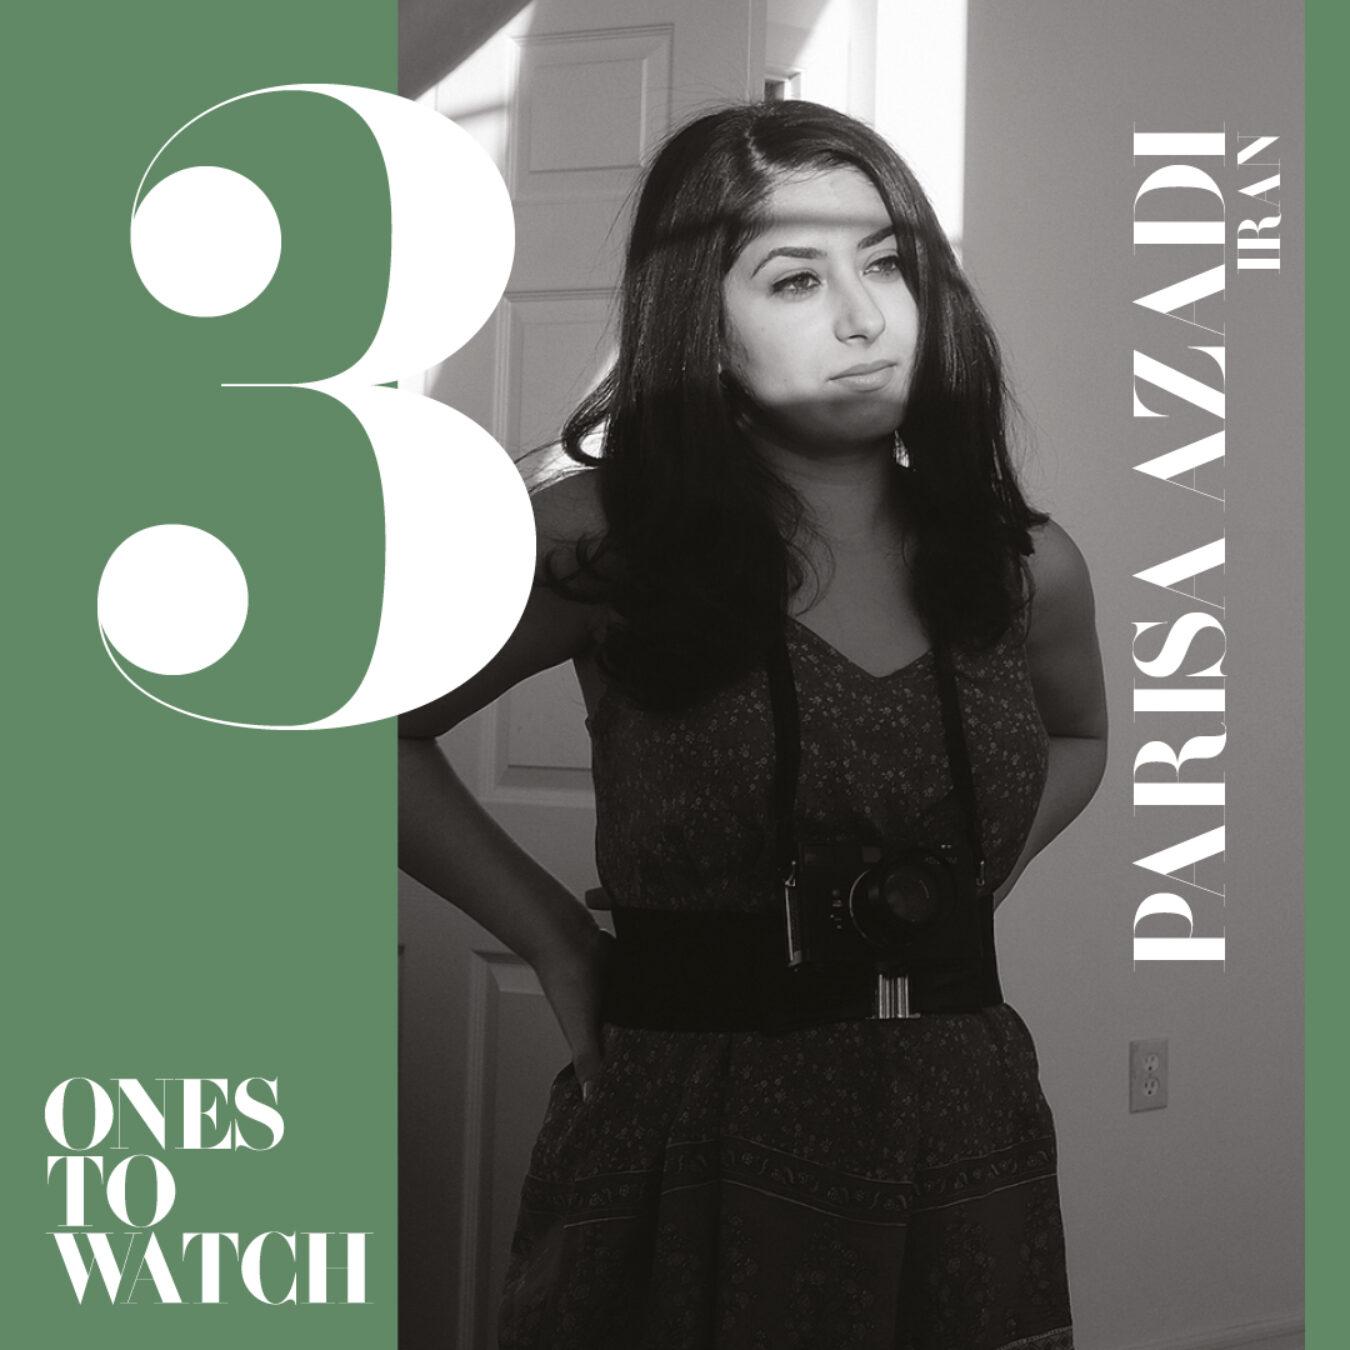 Ones To Watch by the British Journal of Photography